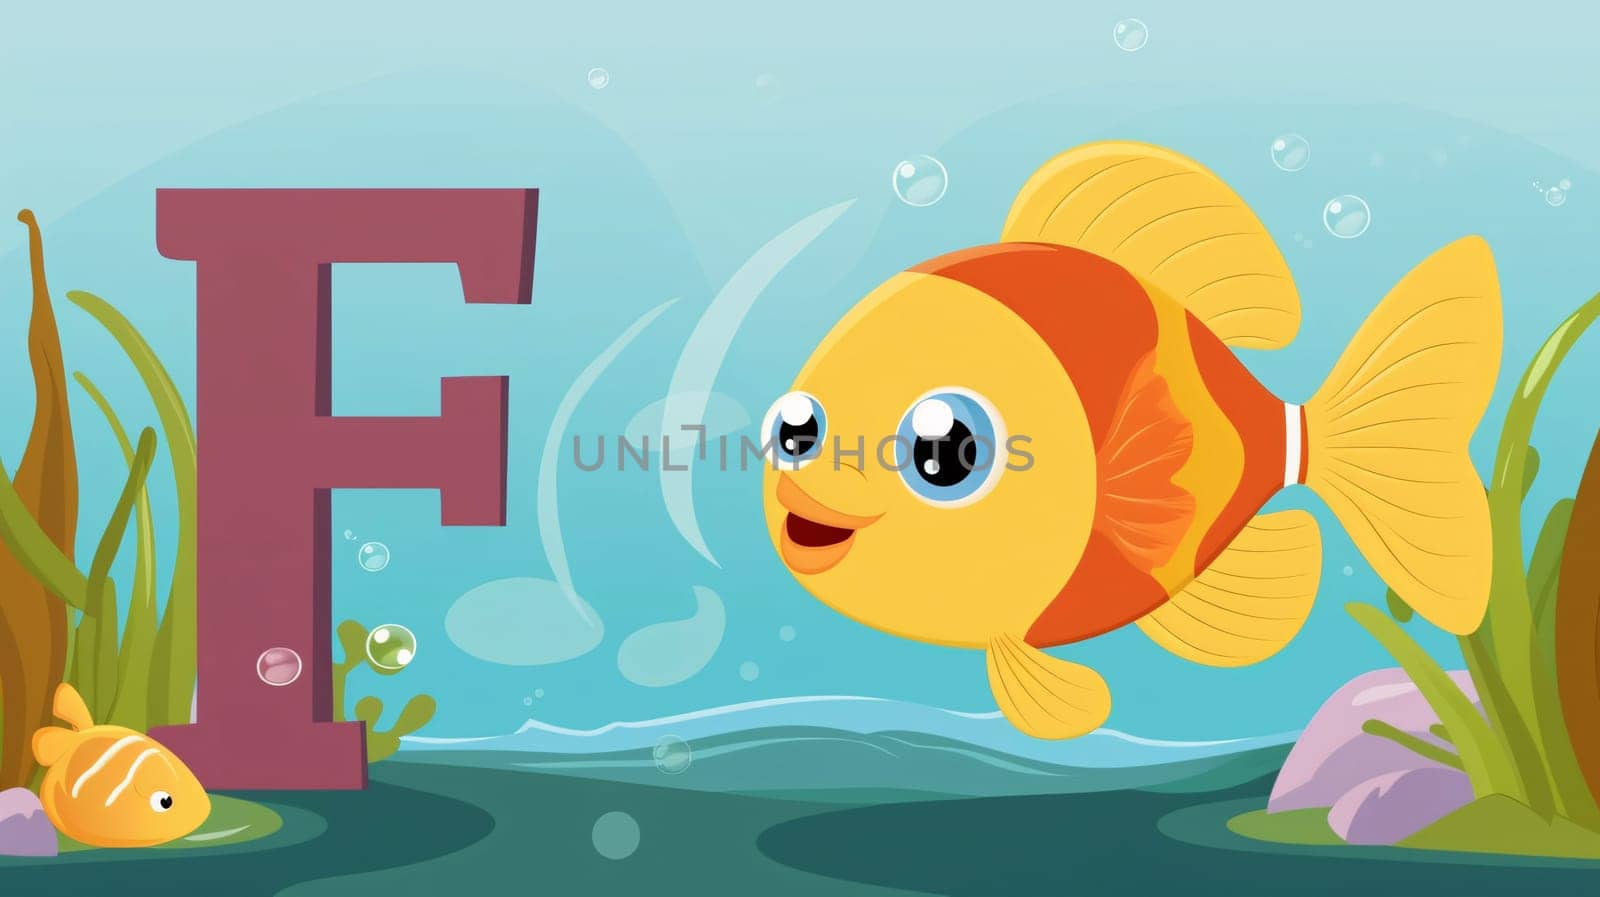 Graphic alphabet letters: Font design for word f with cute fish in the ocean background illustration